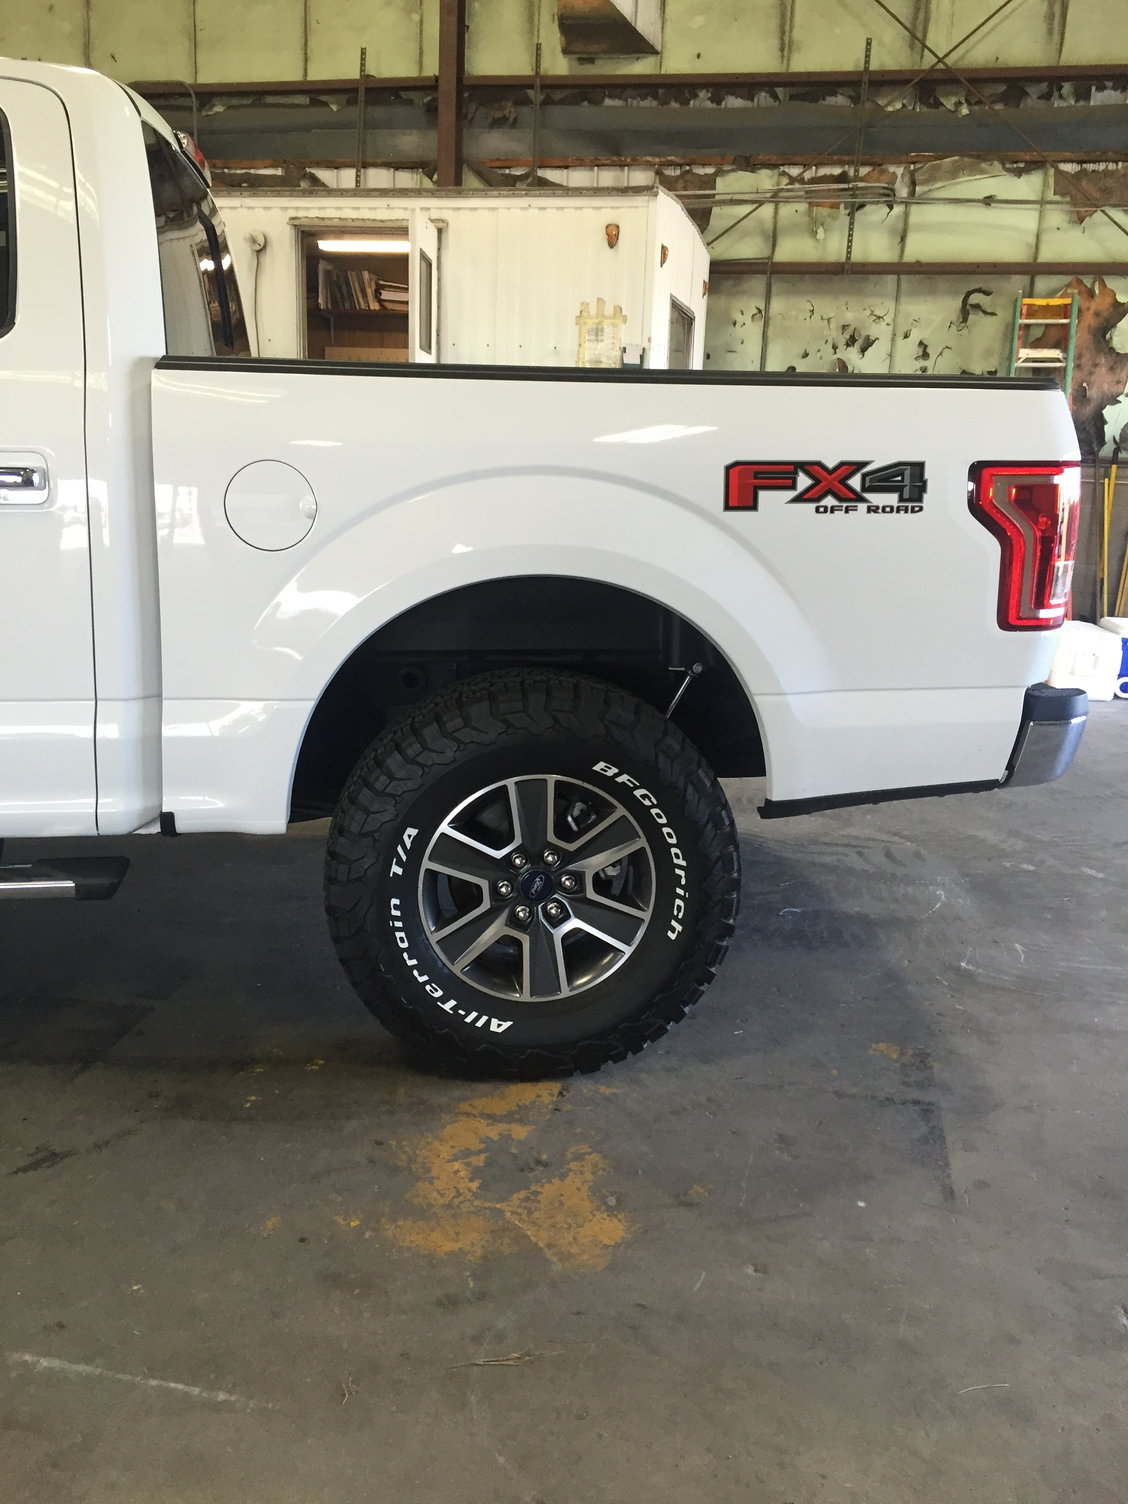 Largest Tire On 18 Oe Wheels Ford Truck Enthusiasts Forums